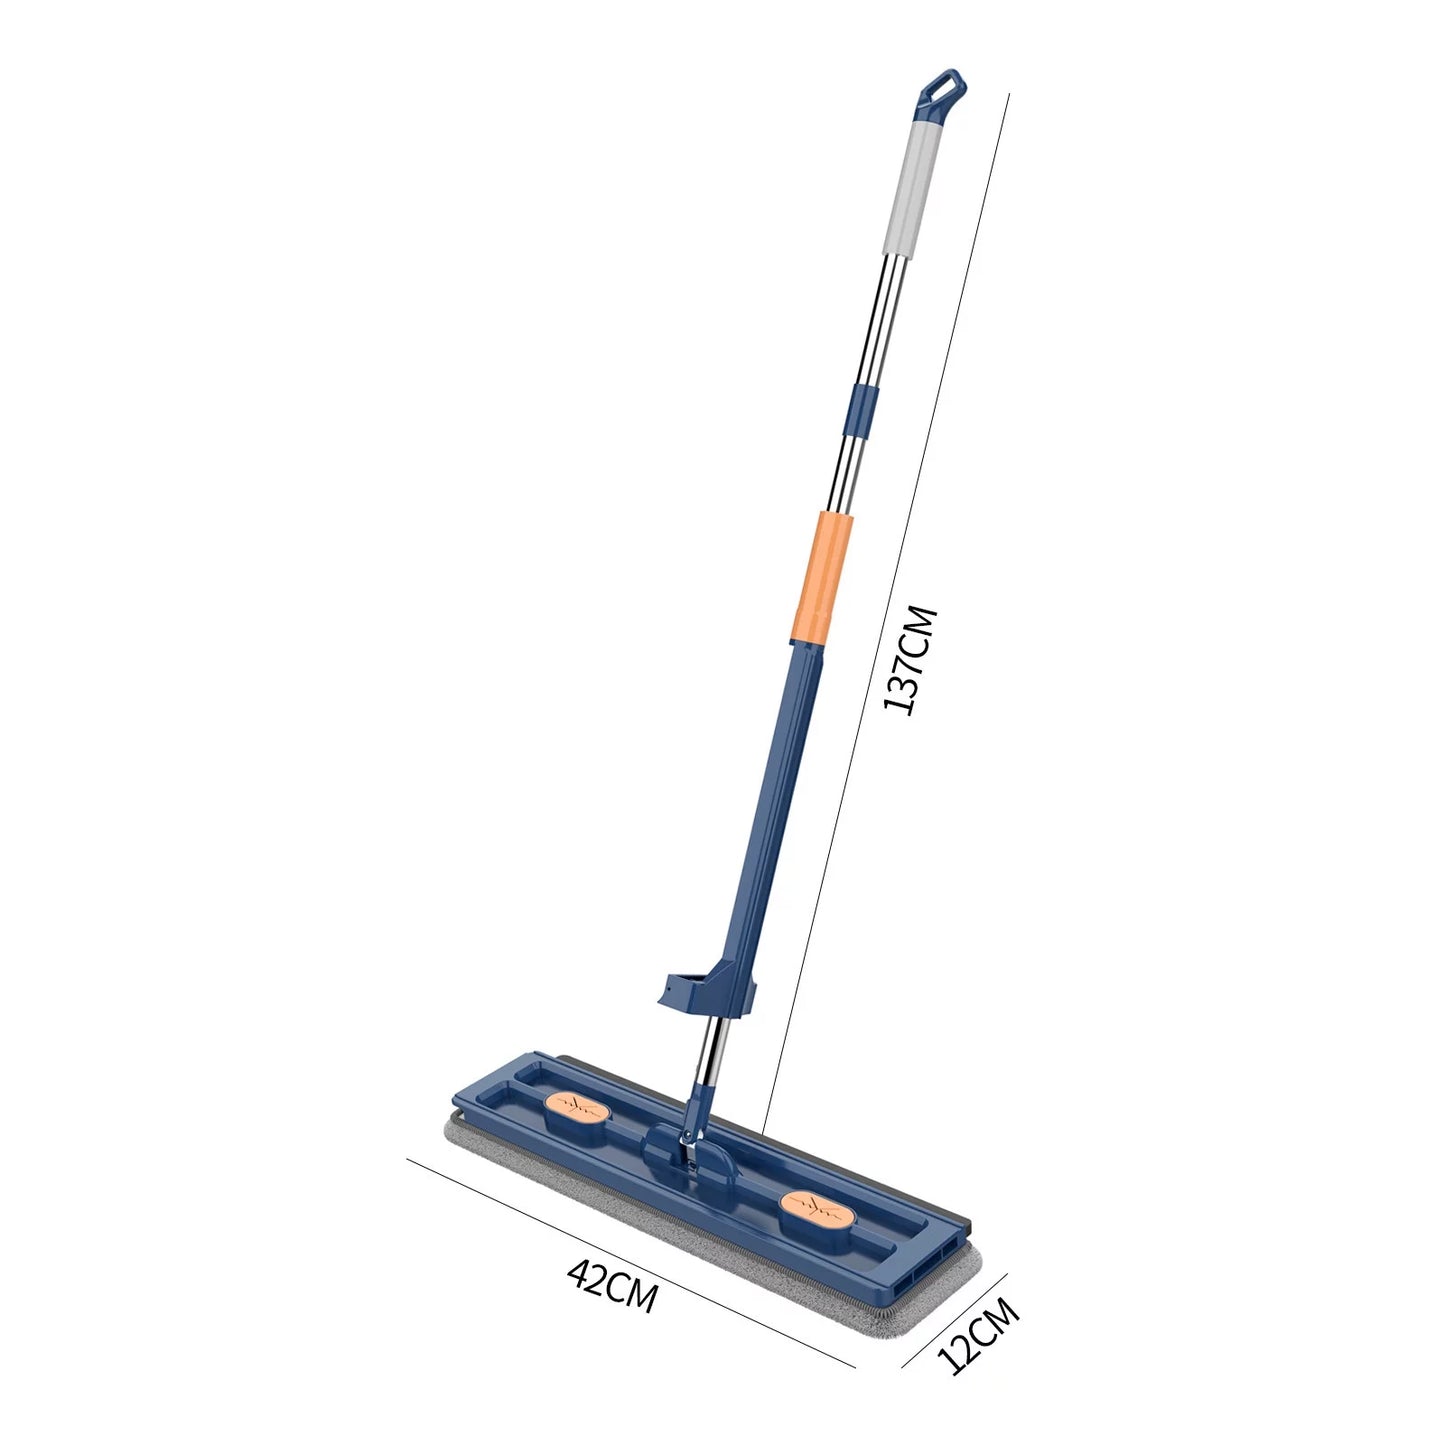 This is a large flat mop for wet and dry use, measuring 54 inches with microfiber pads.